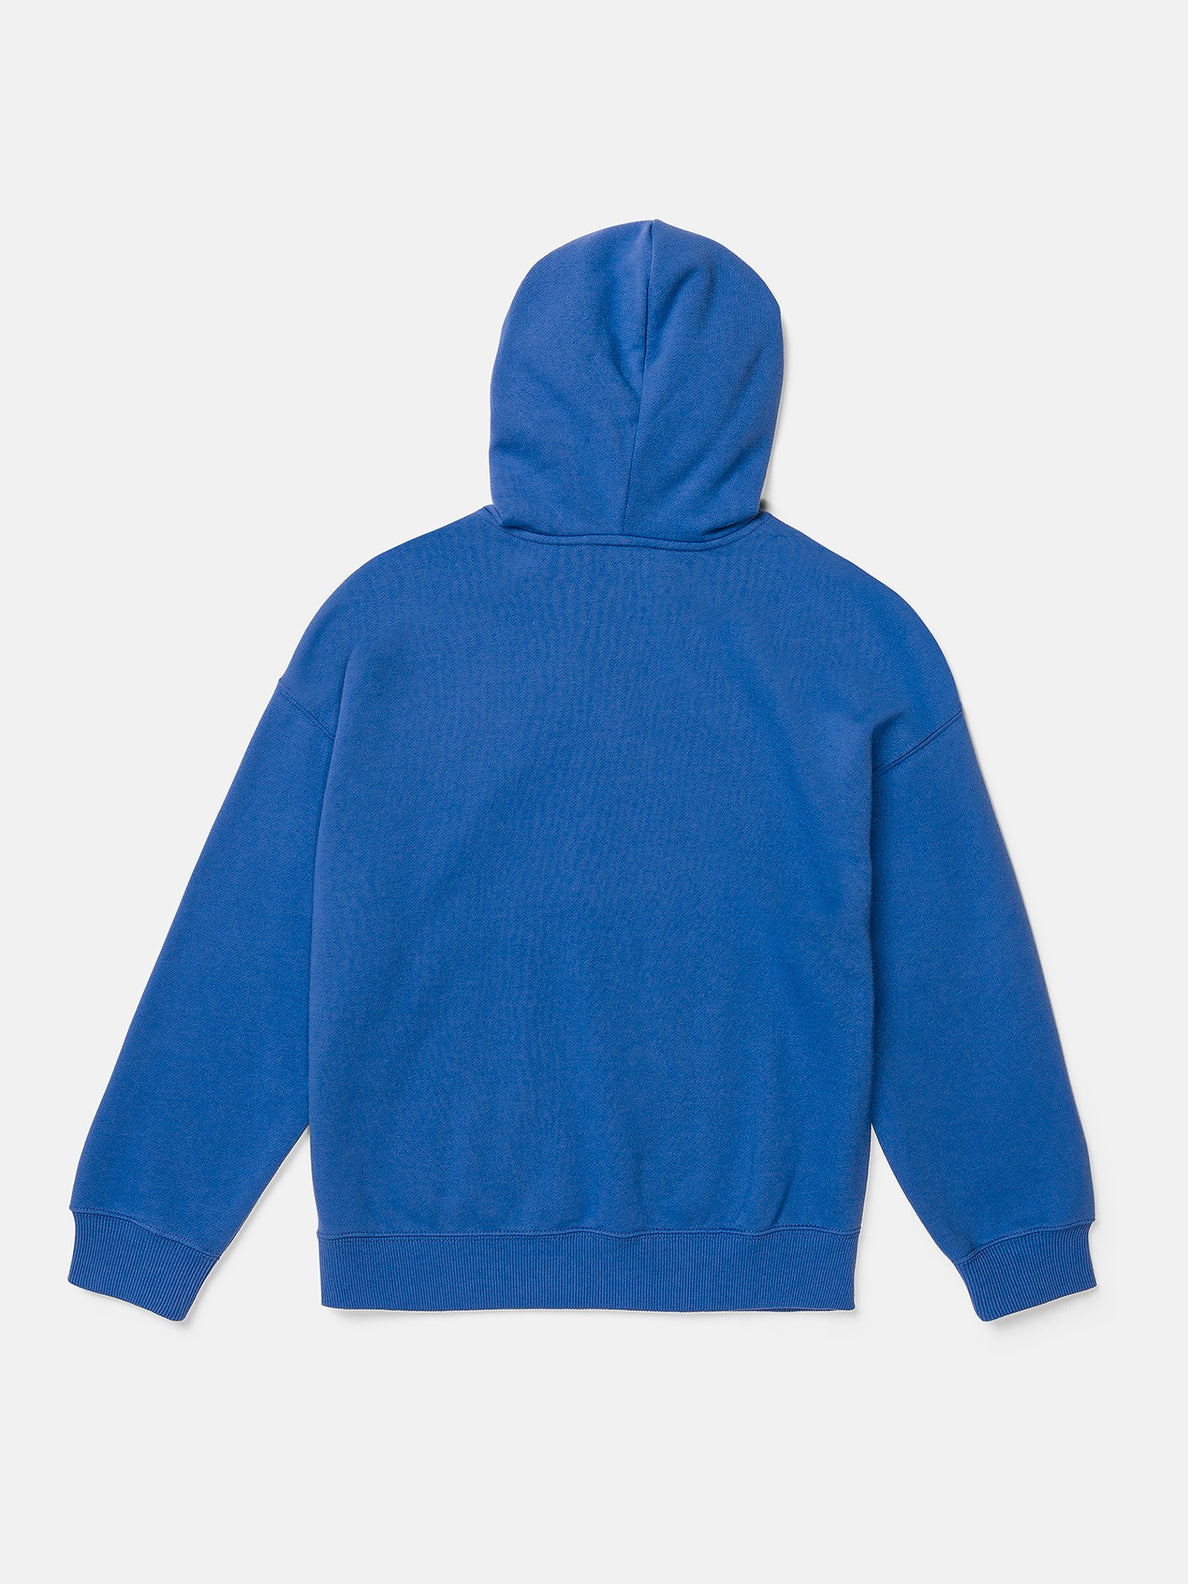 Big Youth Wobbled Pullover - Patriot Blue